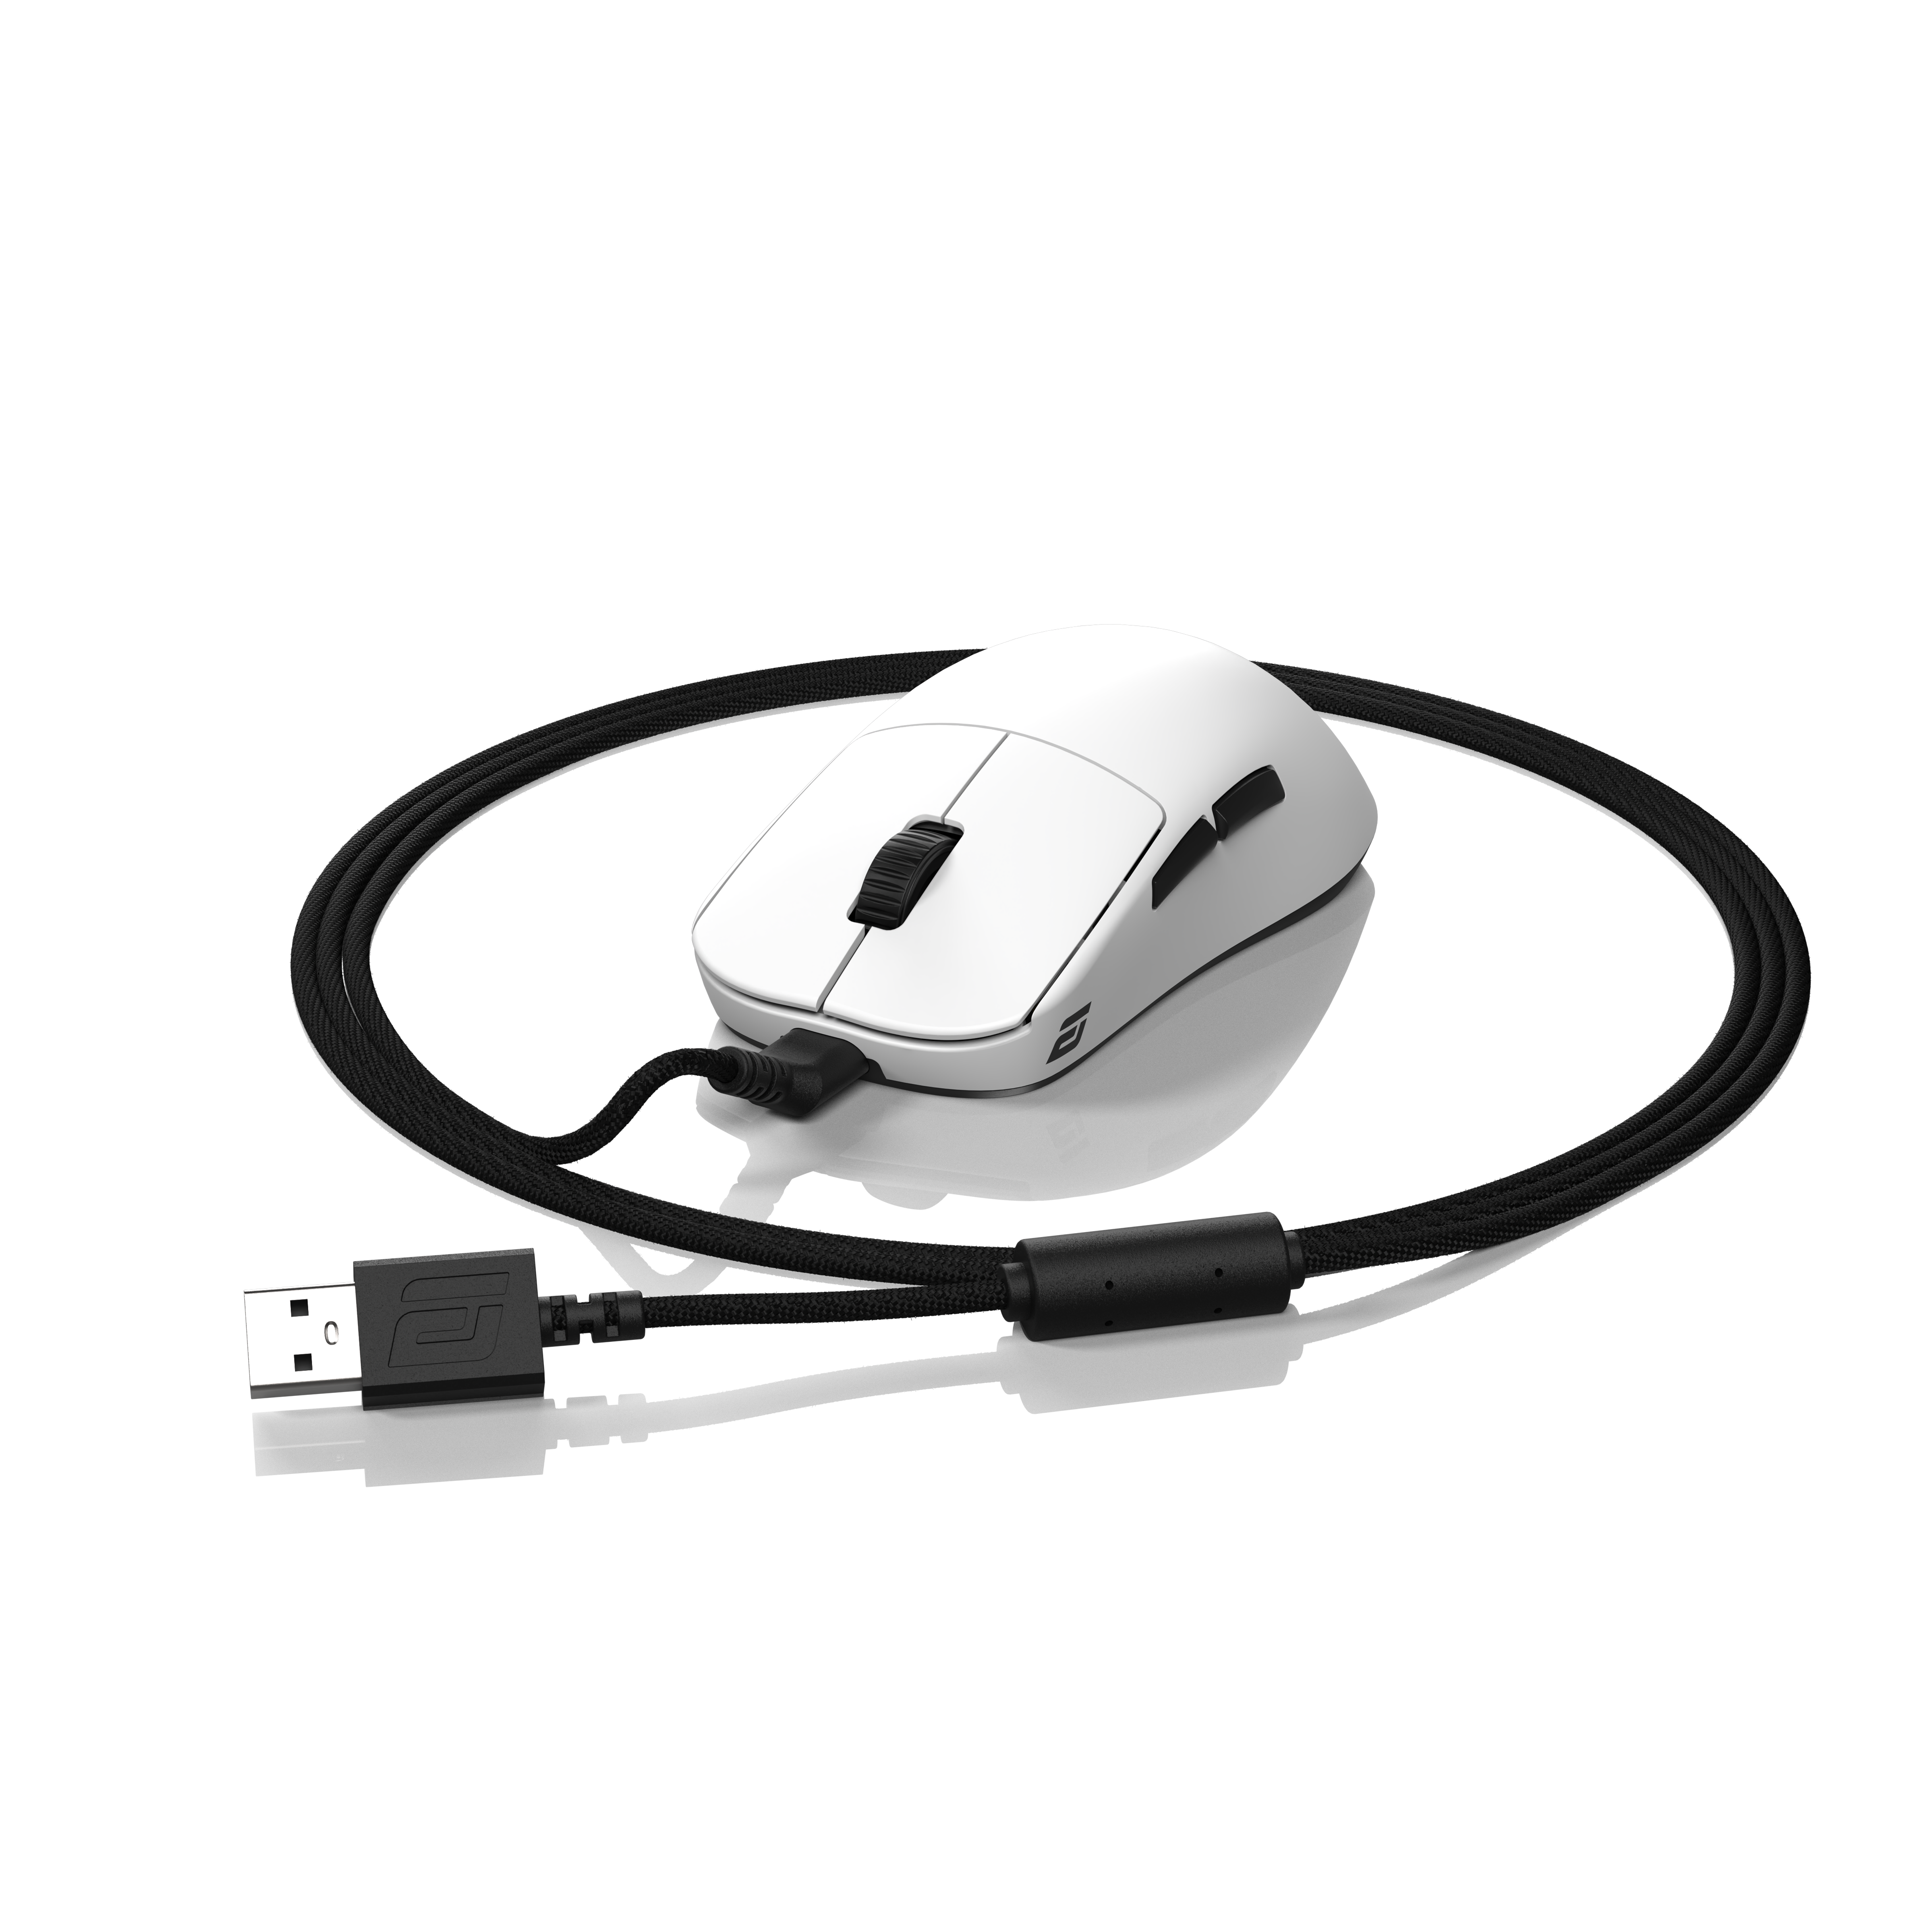 endgame-gear - OP1we Gaming Mouse - White